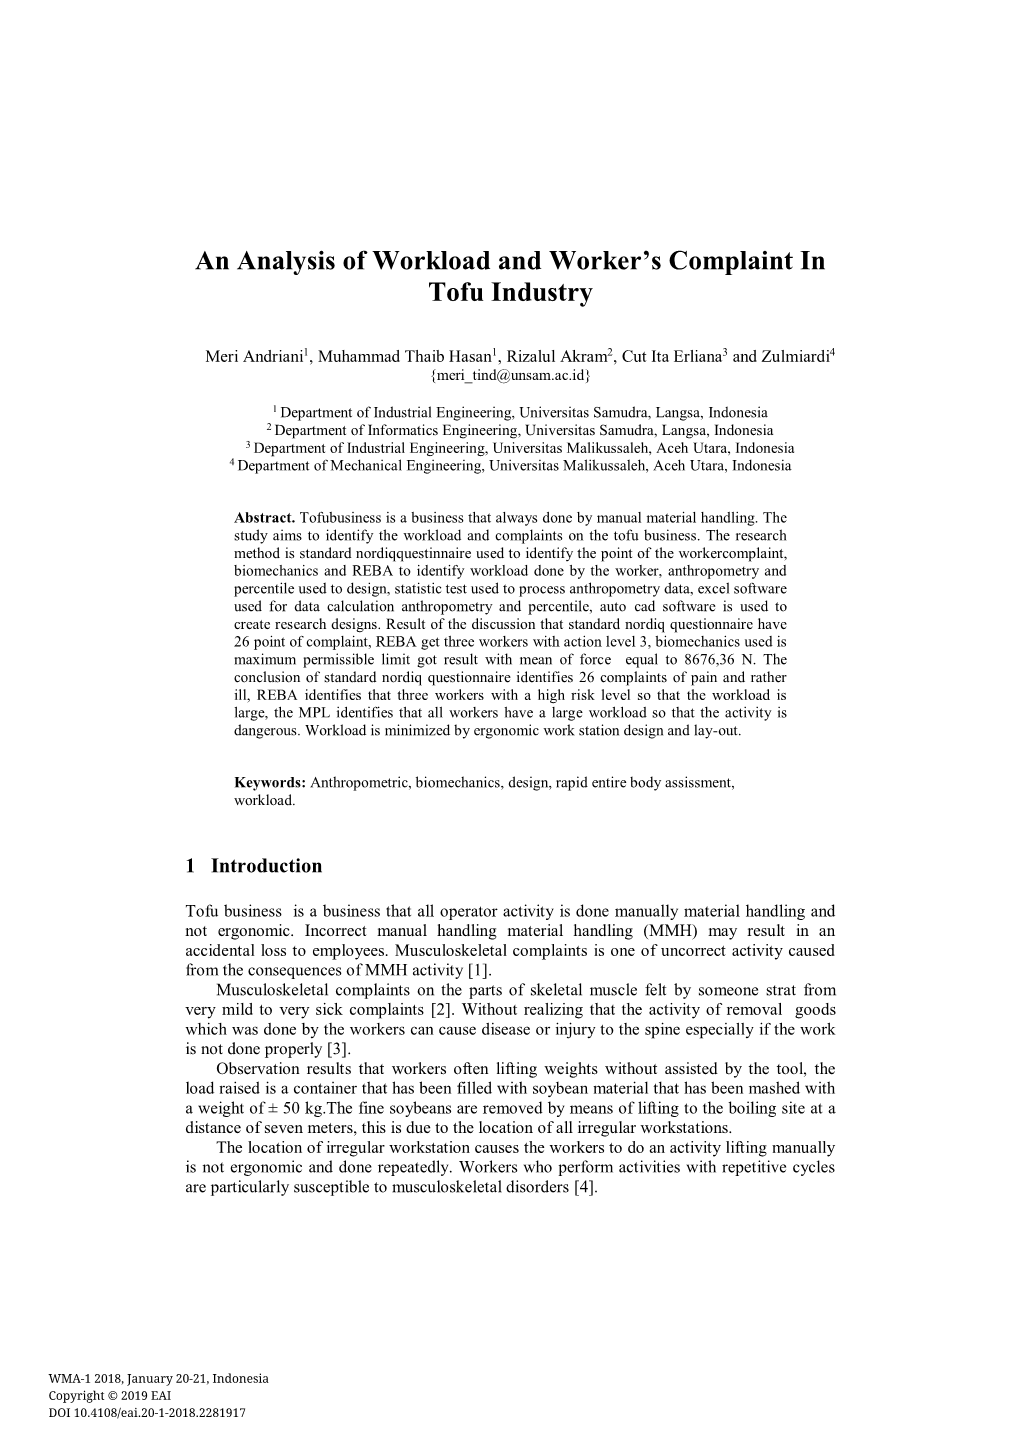 An Analysis of Workload and Worker's Complaint in Tofu Industry